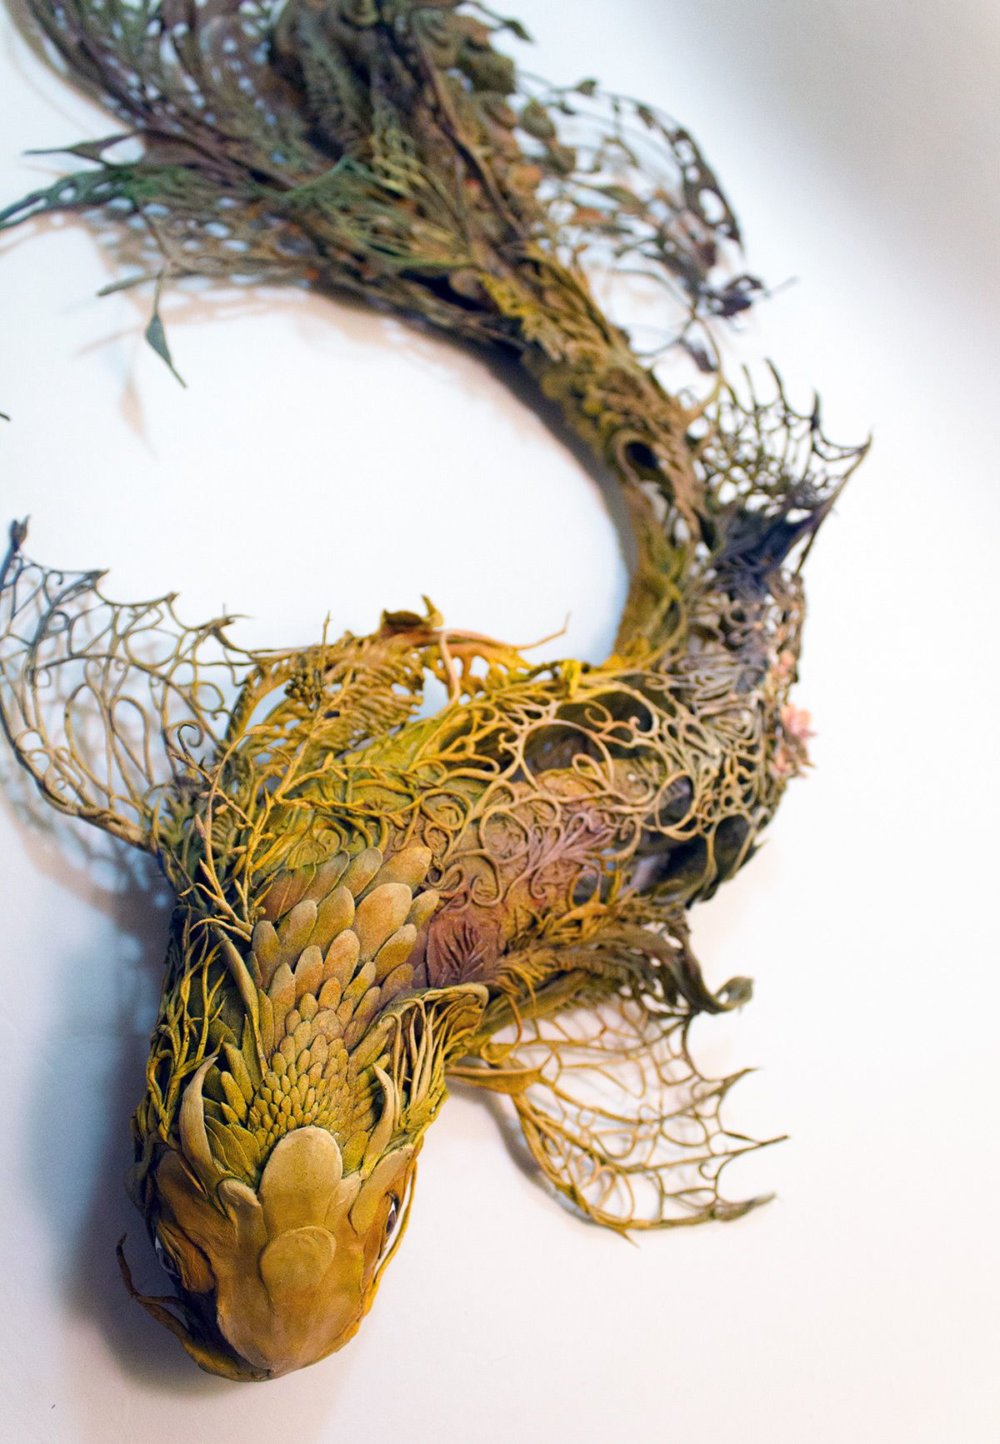 Lush And Surreal Sculptures Of Symbiotic Animals By Ellen Jewett 13